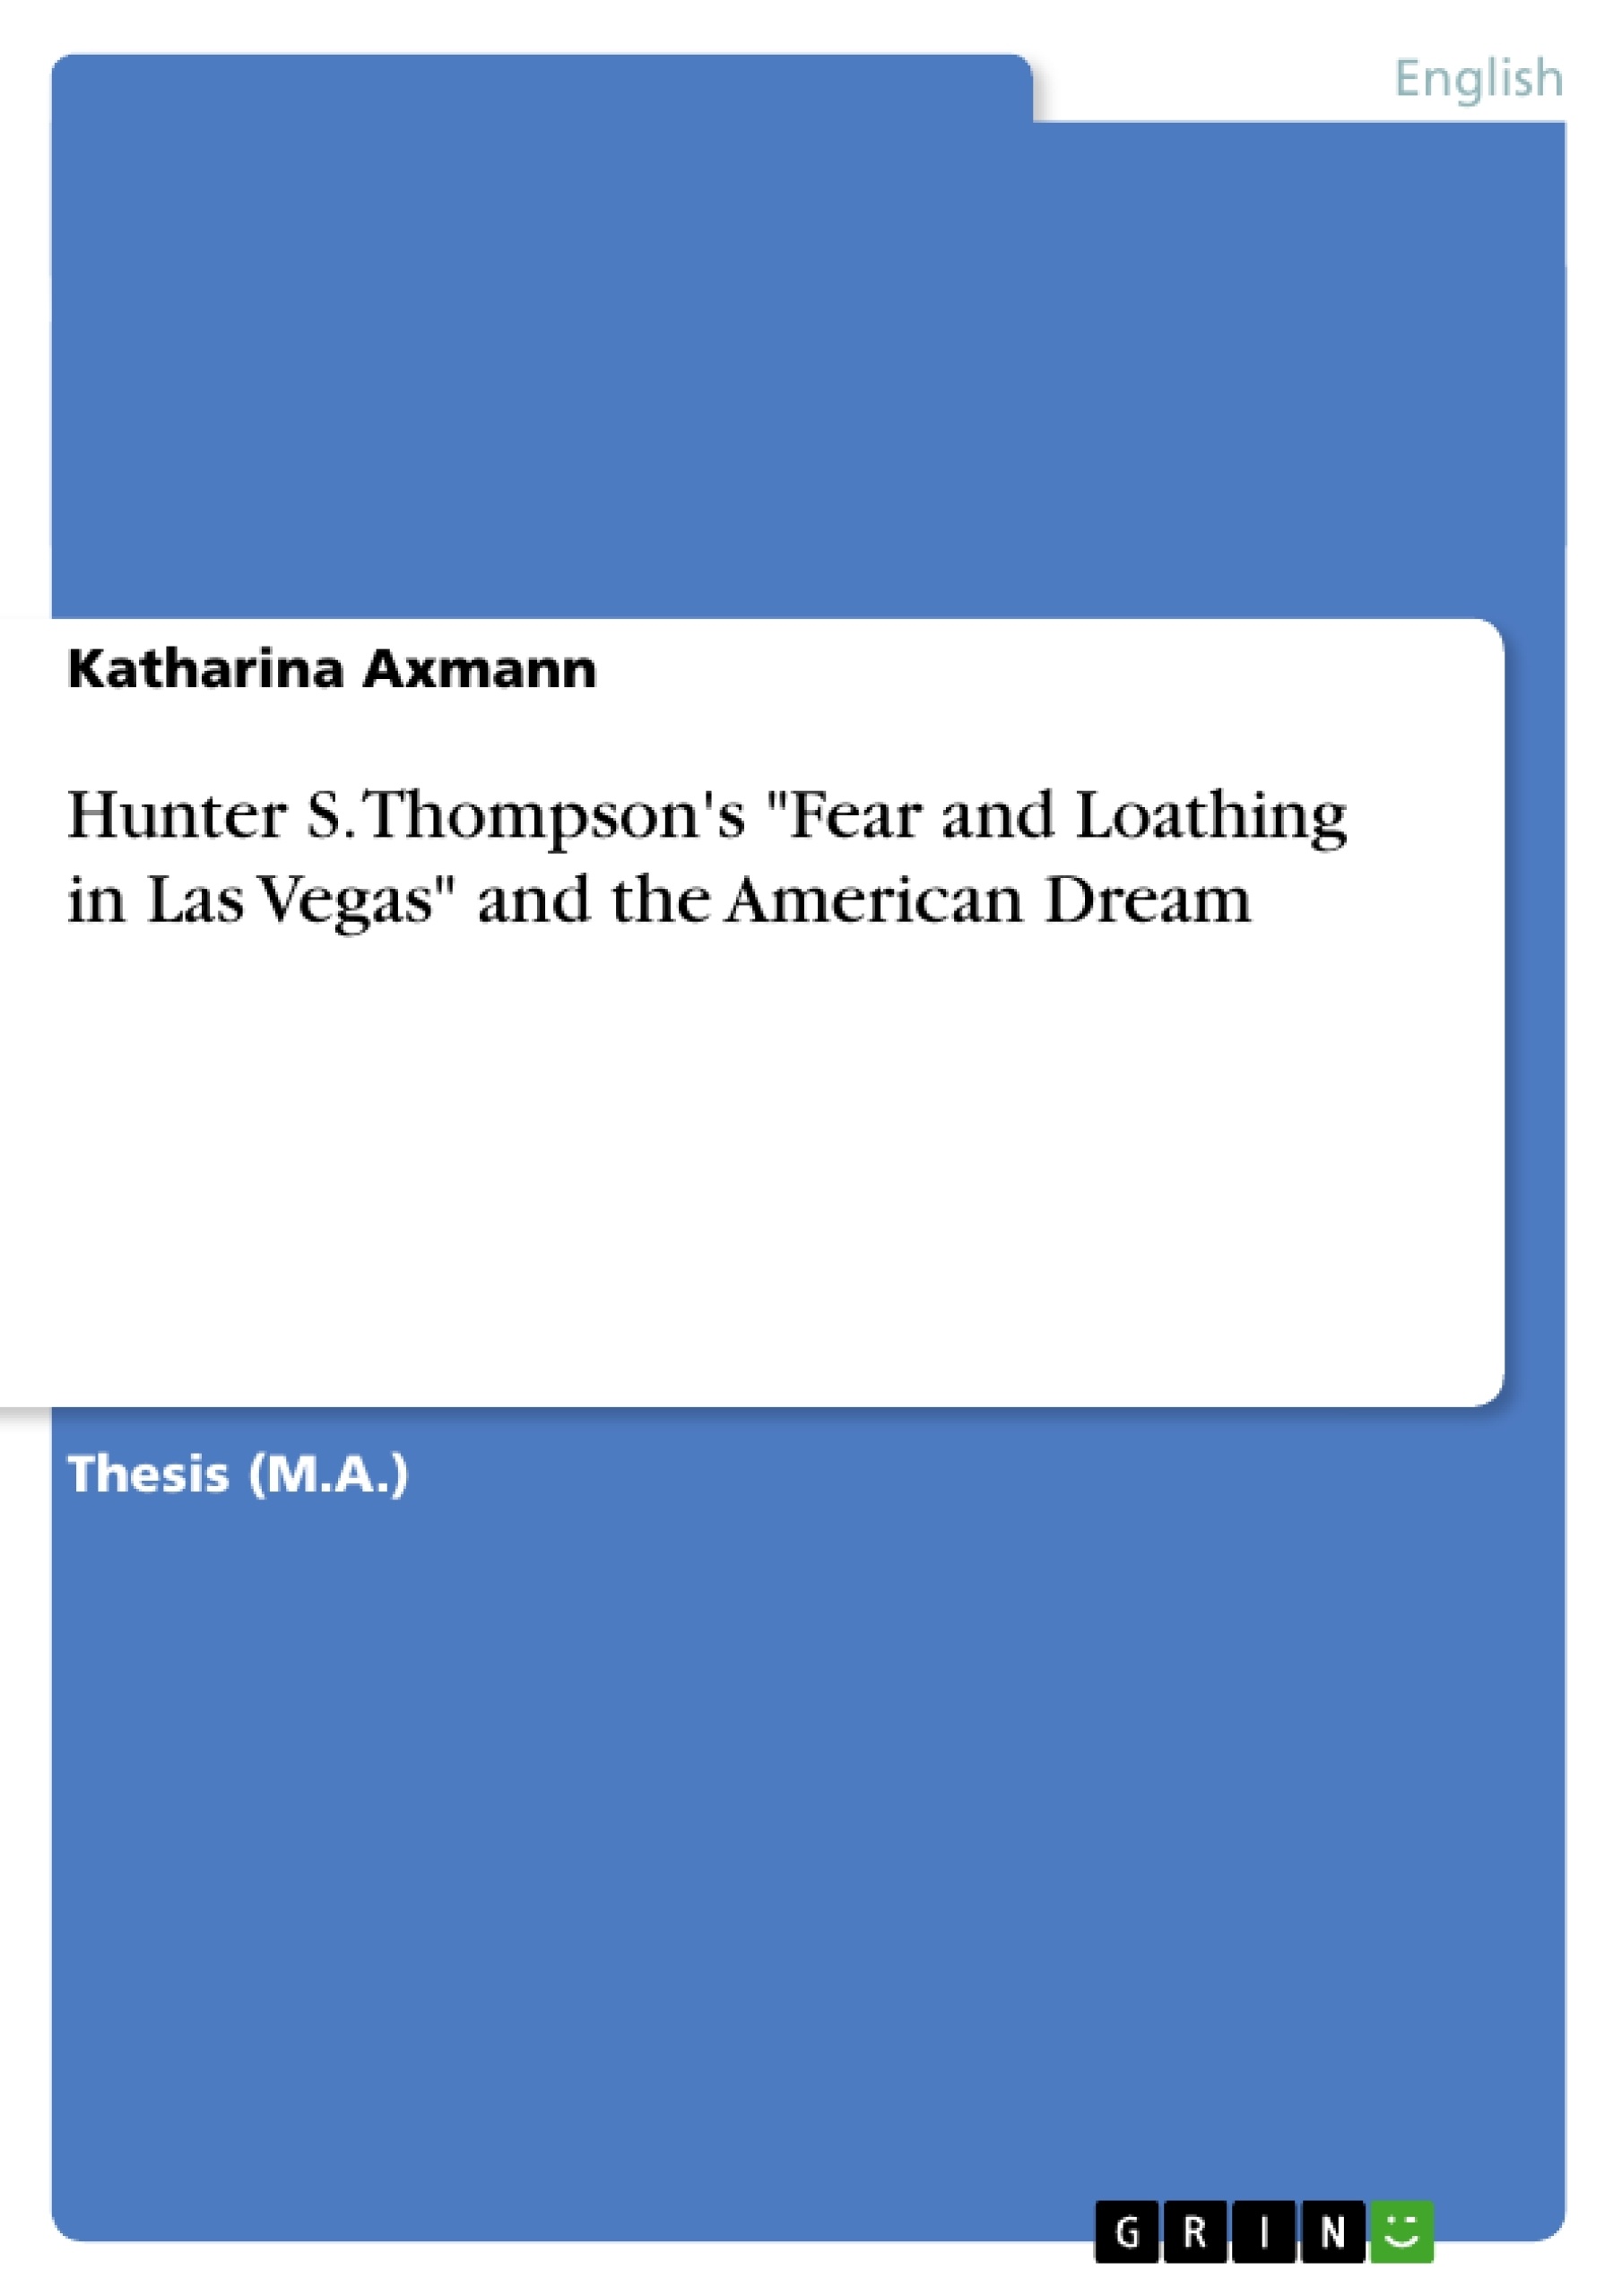 Title: Hunter S. Thompson's "Fear and Loathing in Las Vegas" and the American Dream